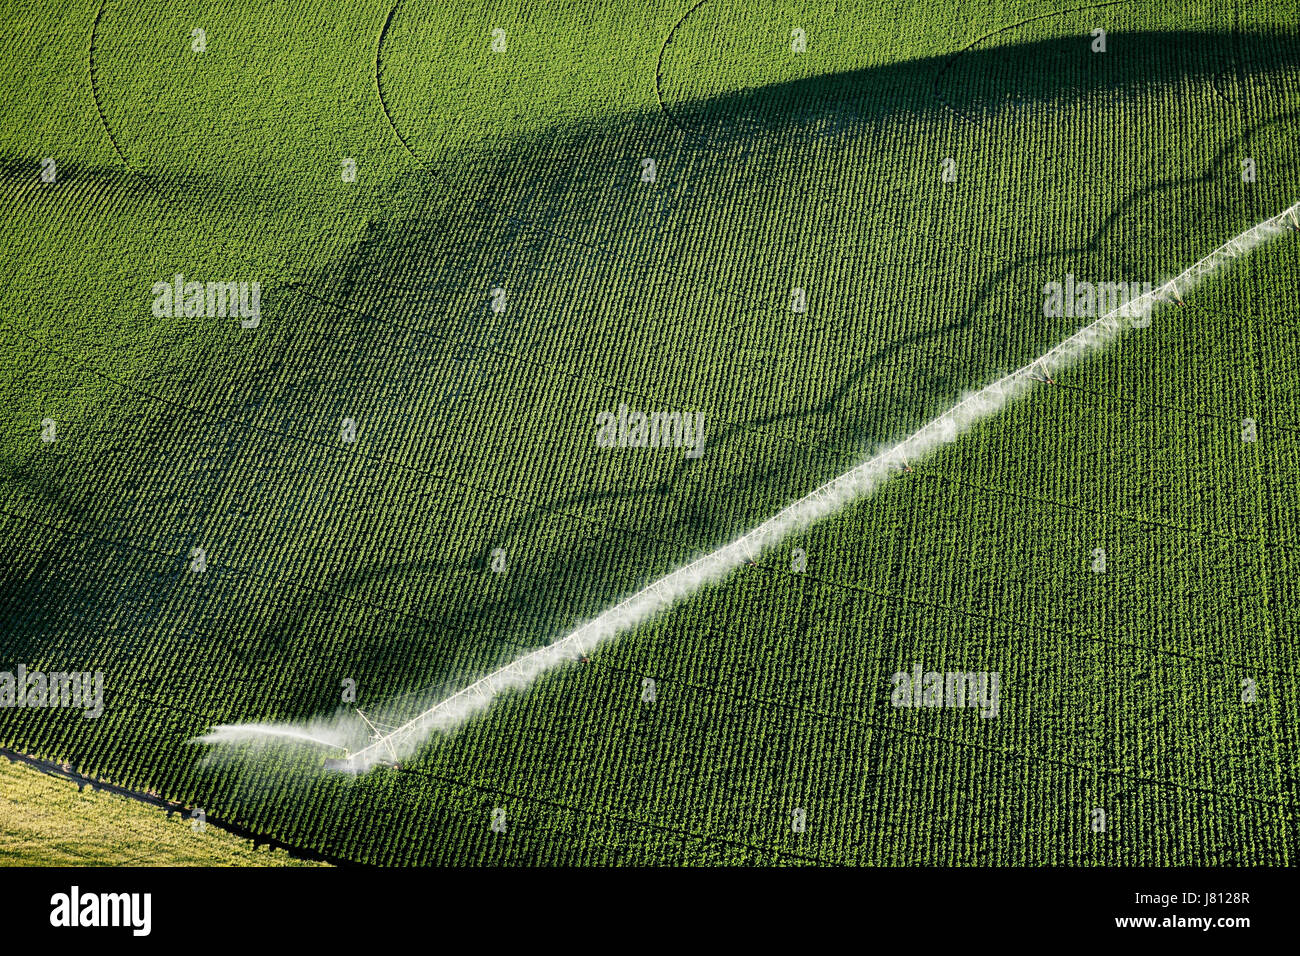 An aerial view of farmland and pivot sprinklers watering the fields. Stock Photo